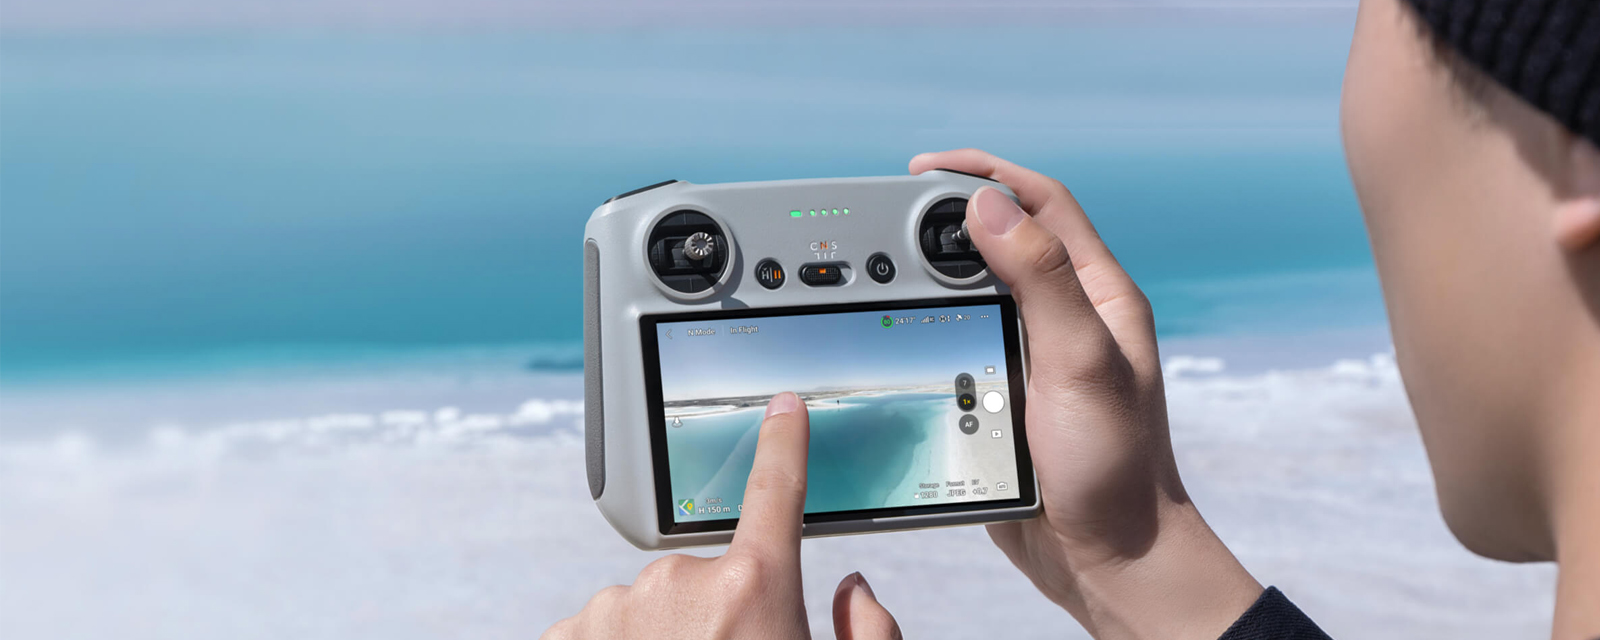 DJI RC Controller: What Drones Are Compatible? | D1 Lounge